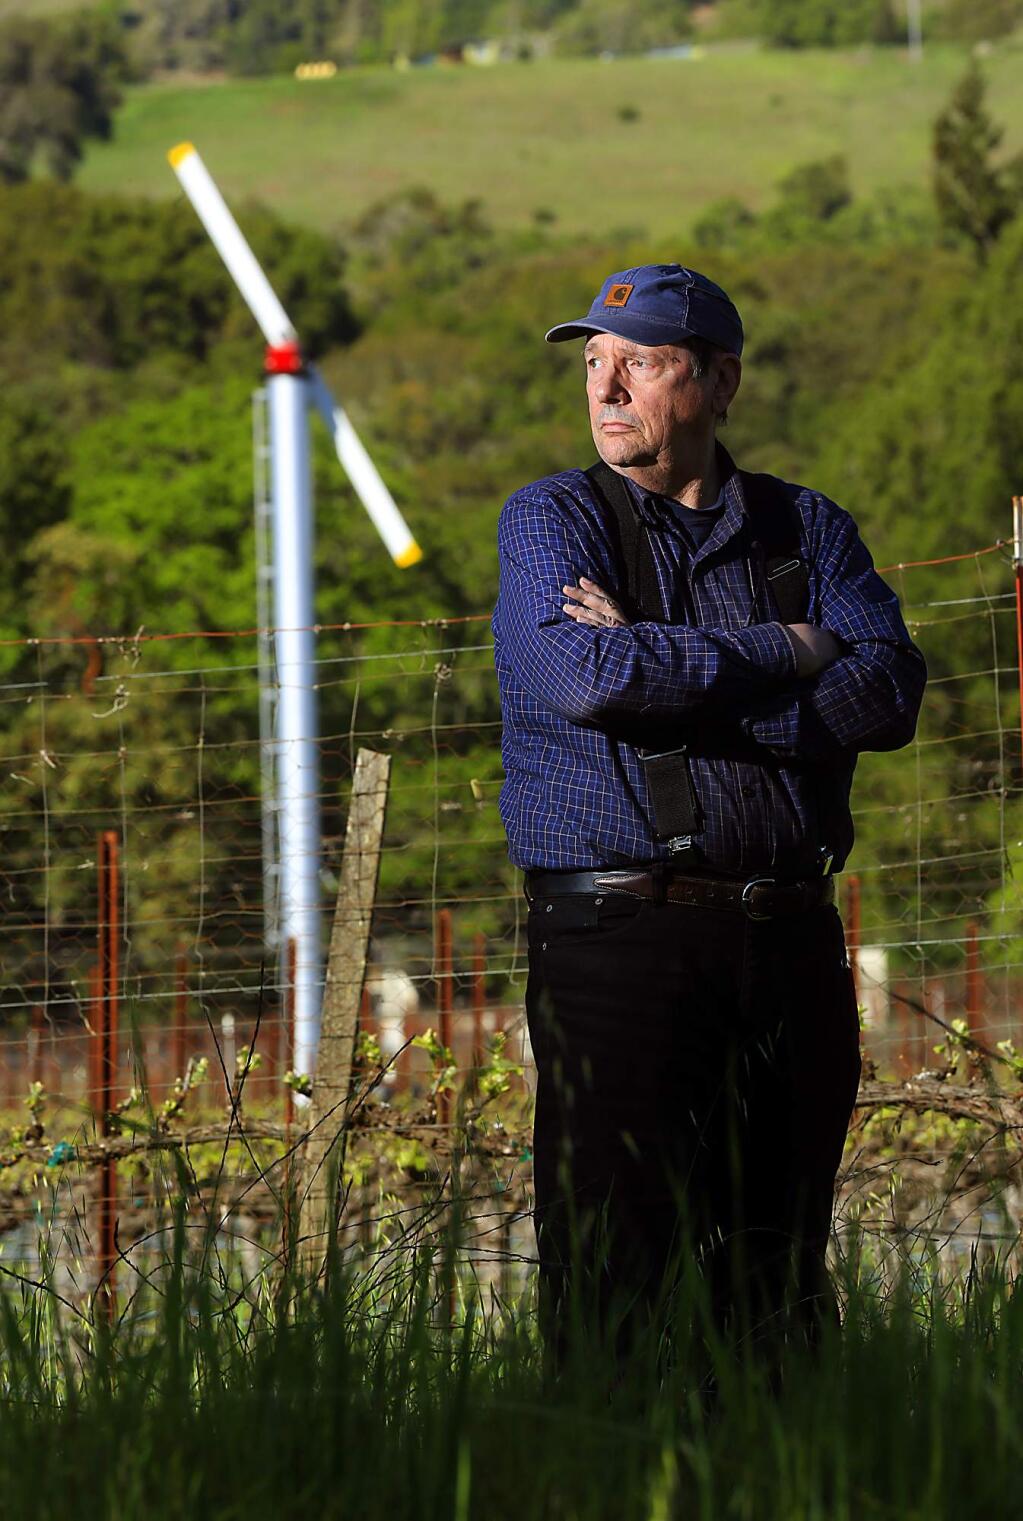 Mark Scaramella was kept awake 20 days last year when loud vineyard fans just 200 yards from his Boonville home where used for frost protection. Scaramella has filed a lawsuit over the noise. (Photo by John Burgess/The Press Democrat)